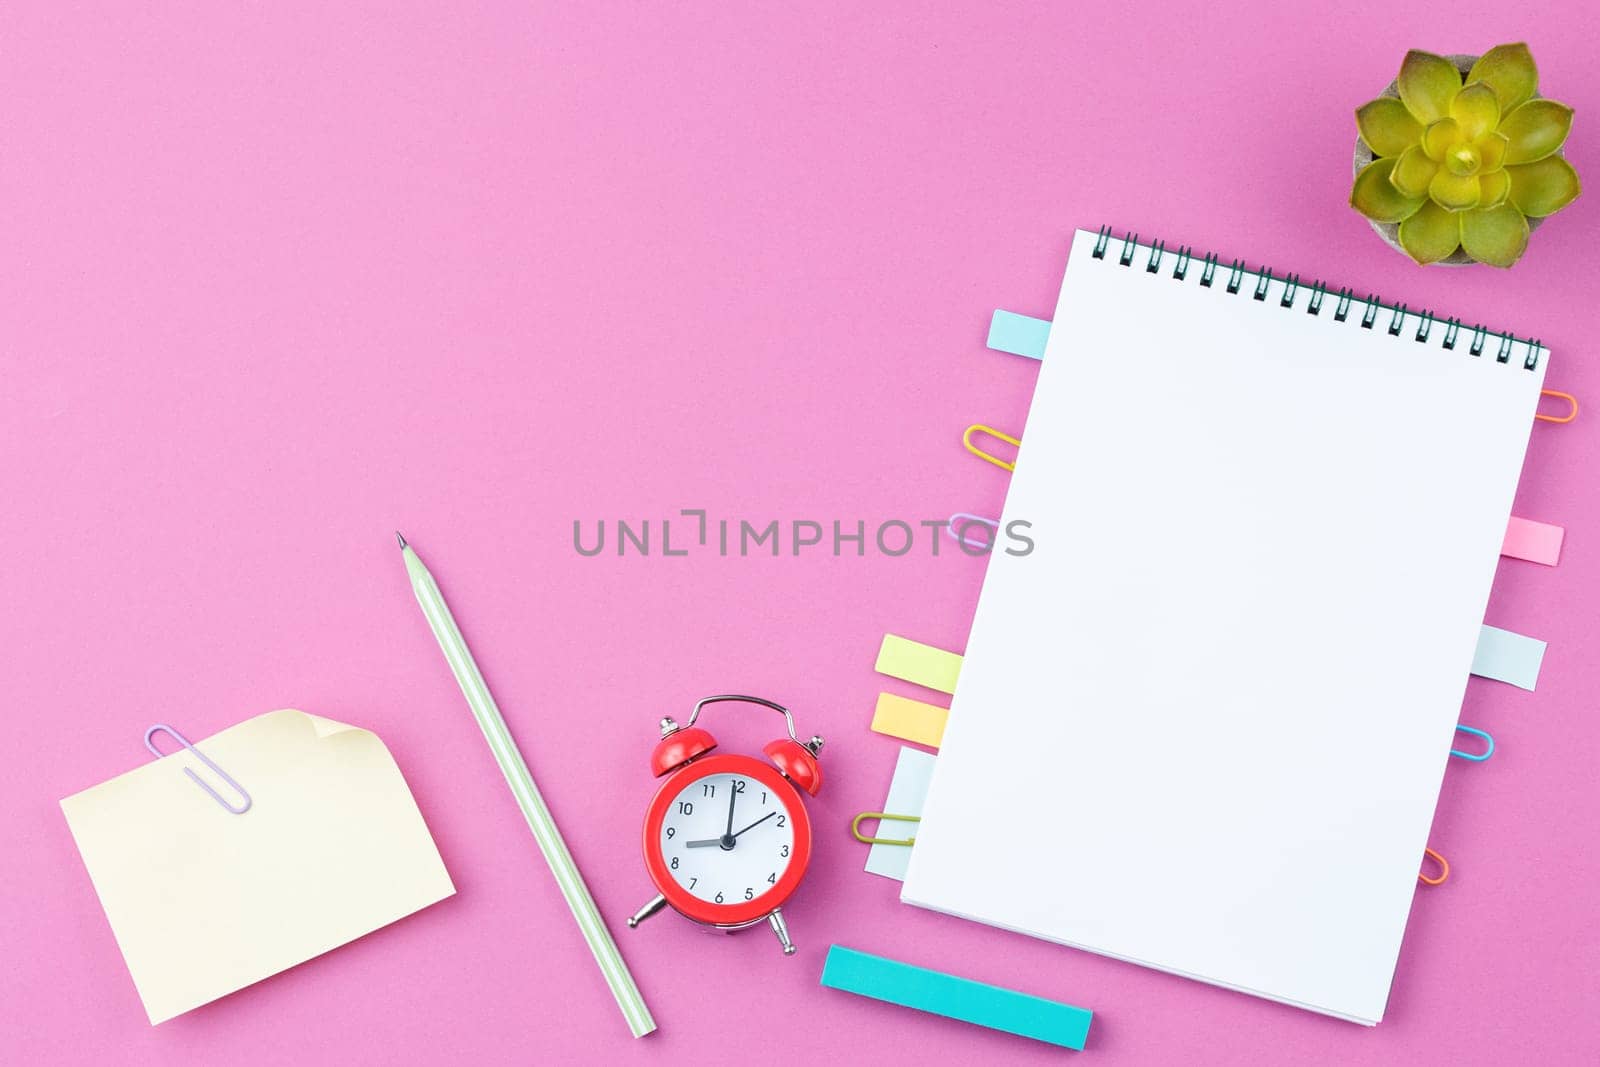 Open spiral notebook with bookmarks from paper clips and leaves for notes, pencile, rubber, alarm clock and a flower in a pot on pink background. Top view. Office desktop concept.